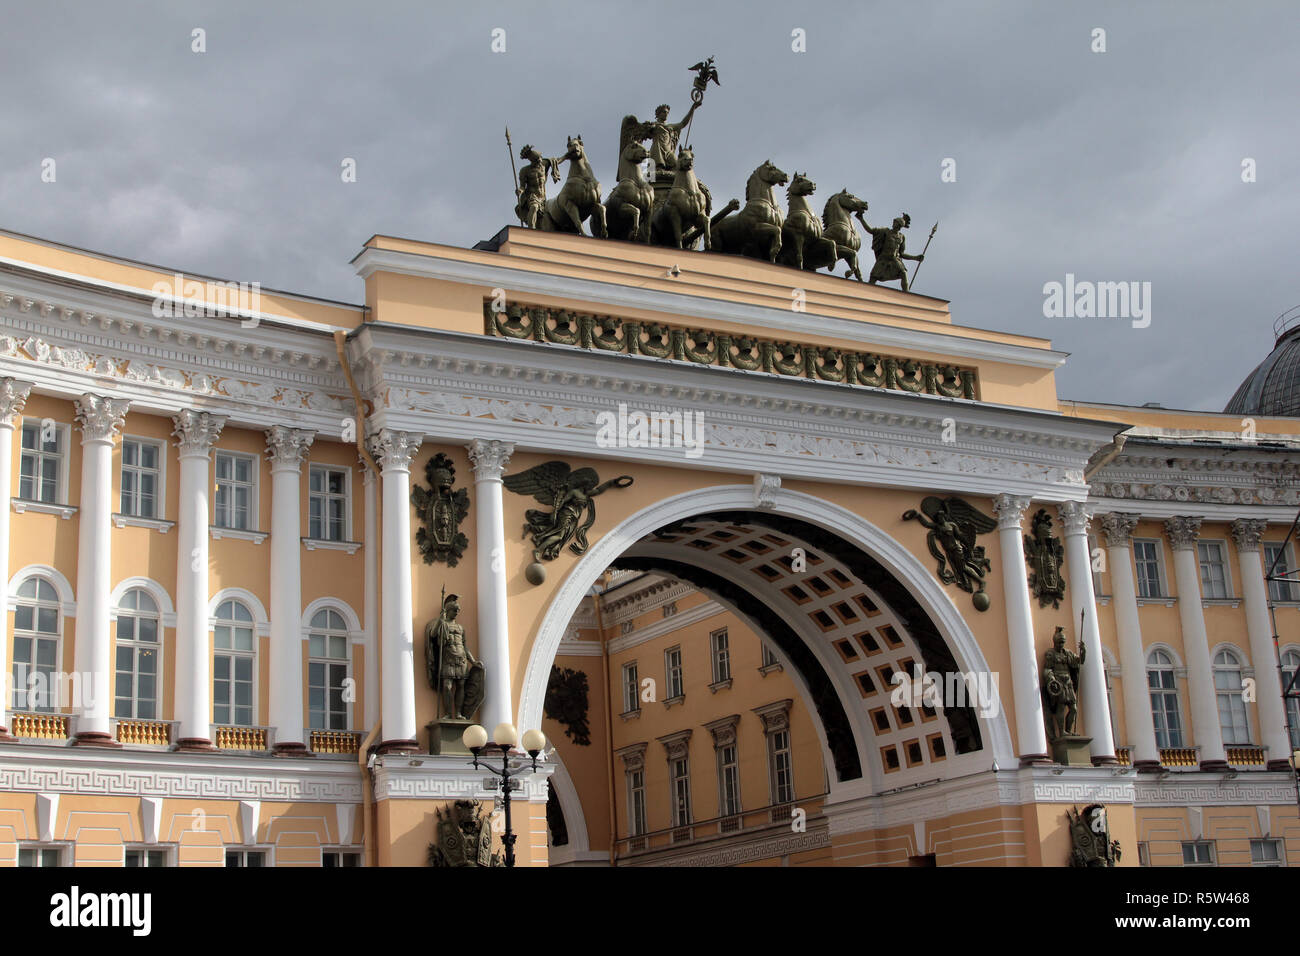 This magnificent building is the General Staff Building and this is the grand entrance to it, with a double arch and a statue of Victory, on her chariot, on top. It is now an overspill from the Hermitage and houses 19th and 20th century paintings in St Petersburg in Russia. Stock Photo